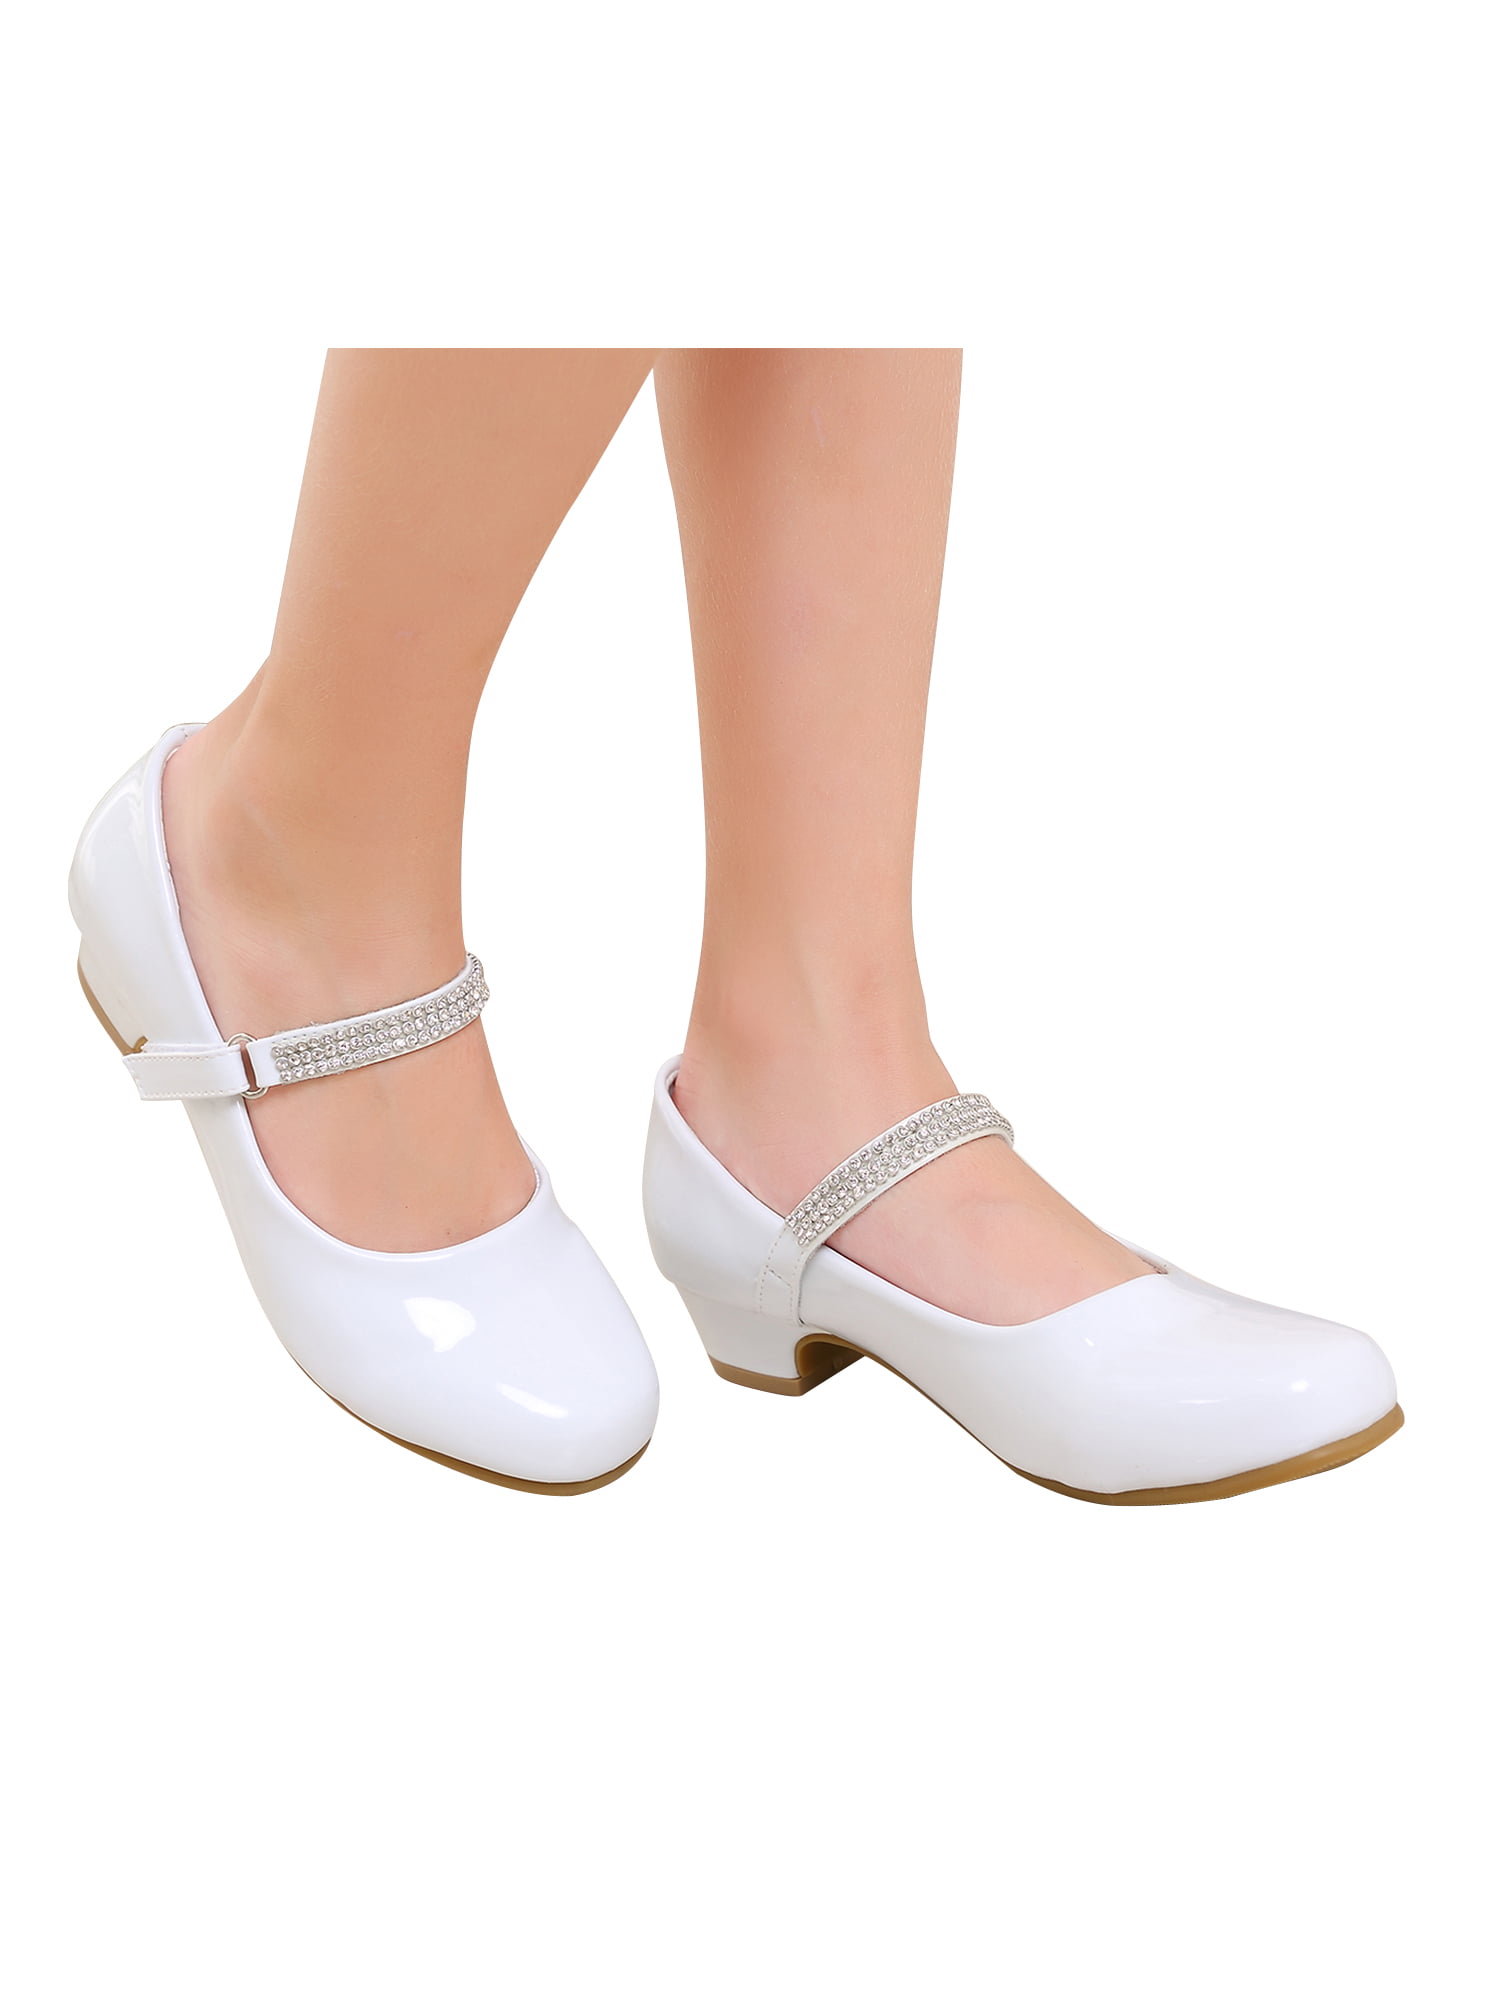 New Girls Youth Kids Comfort Casual Ballet Flat Mary Jane Slip-On School Shoes 